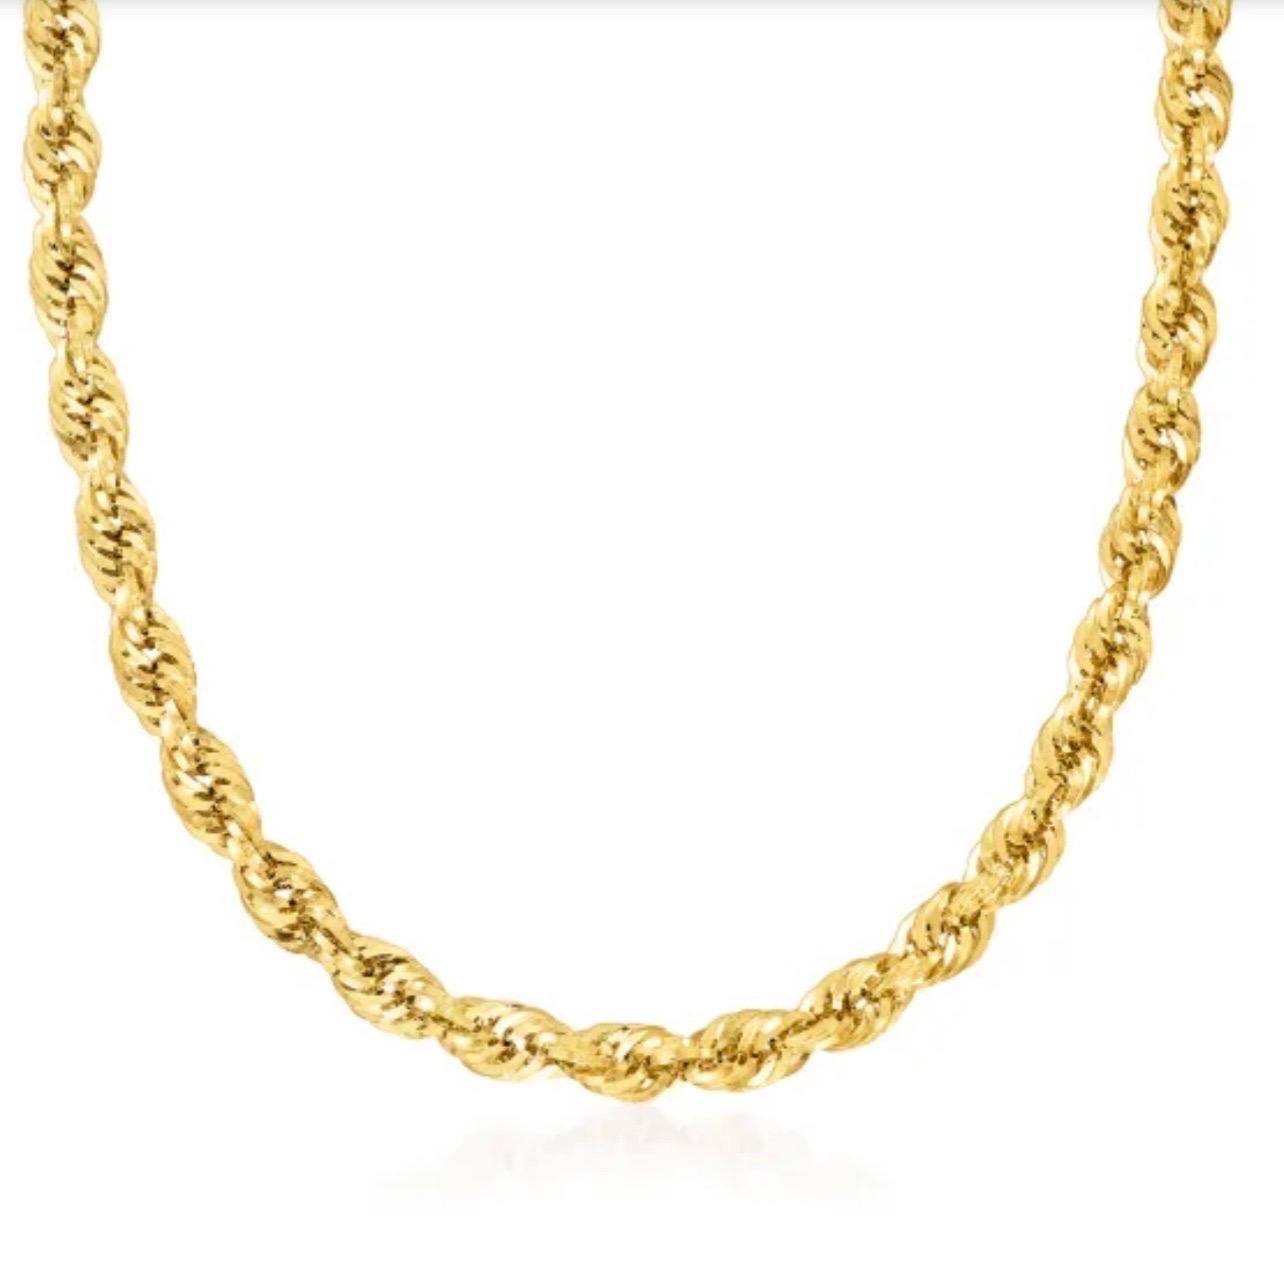 21 inch 14k gold rope chain